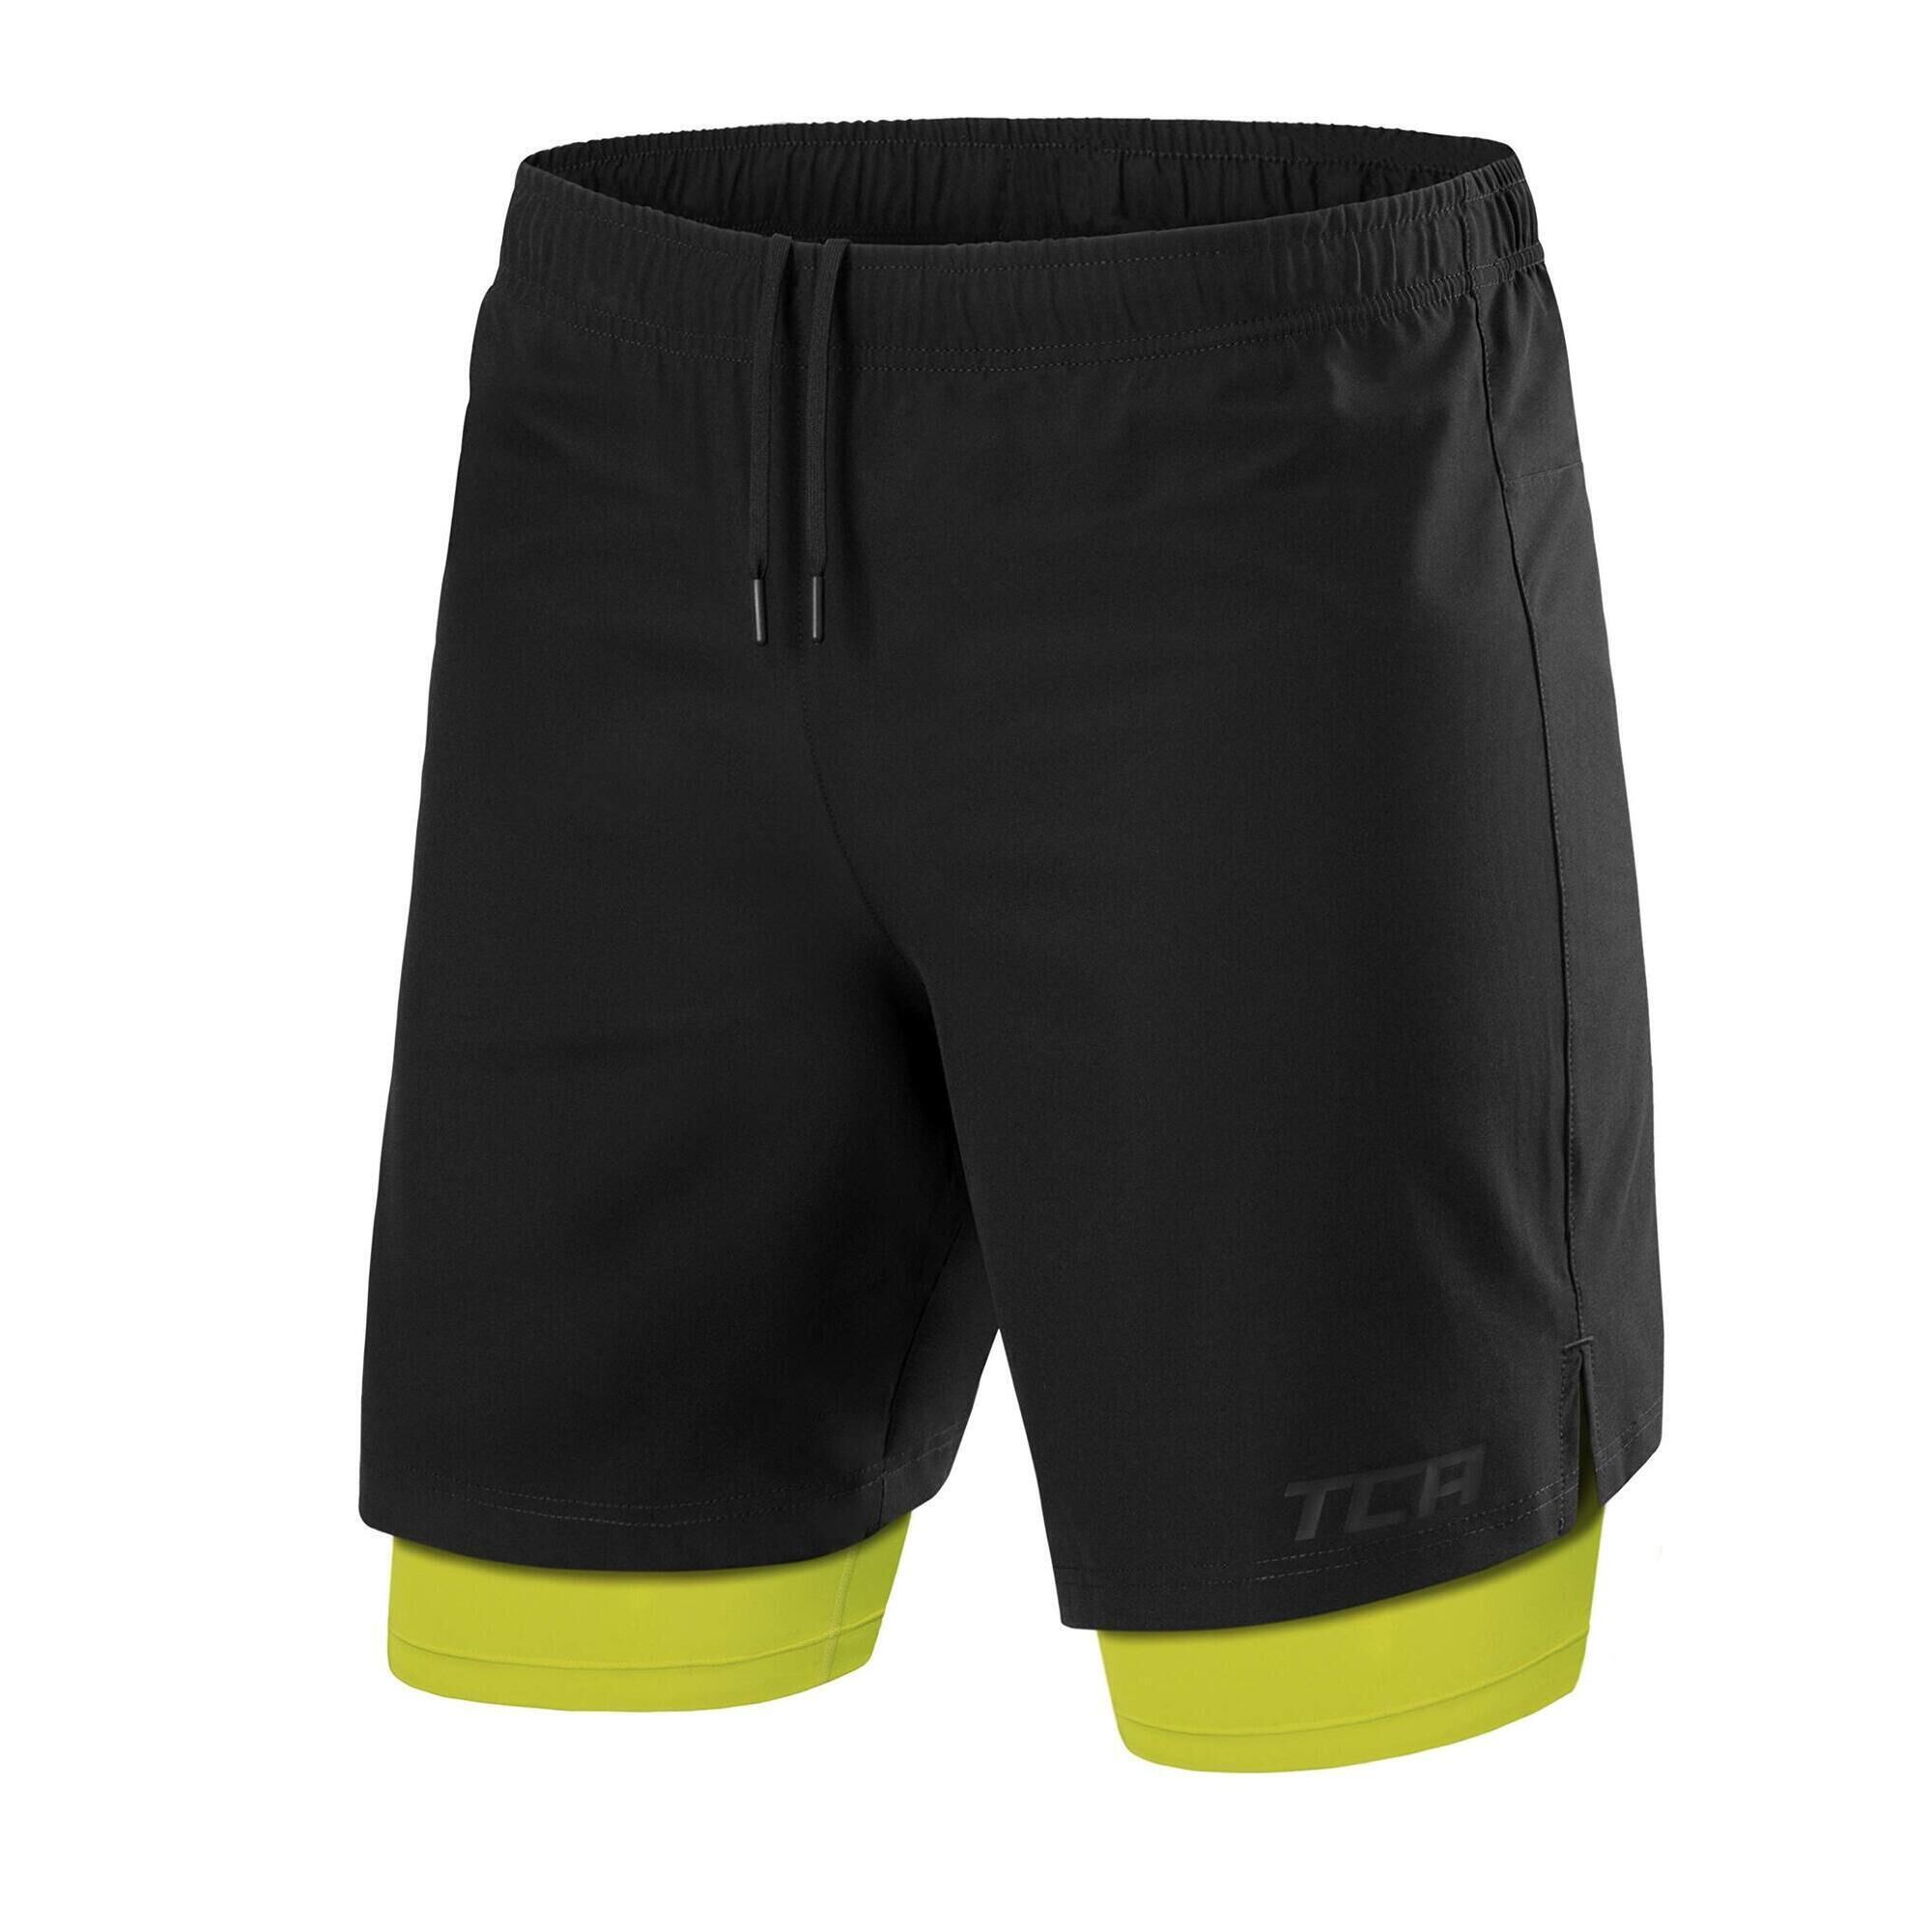 TCA Men's Ultra 2-in-1 Running Shorts with Key Pocket - Black / Lime Punch